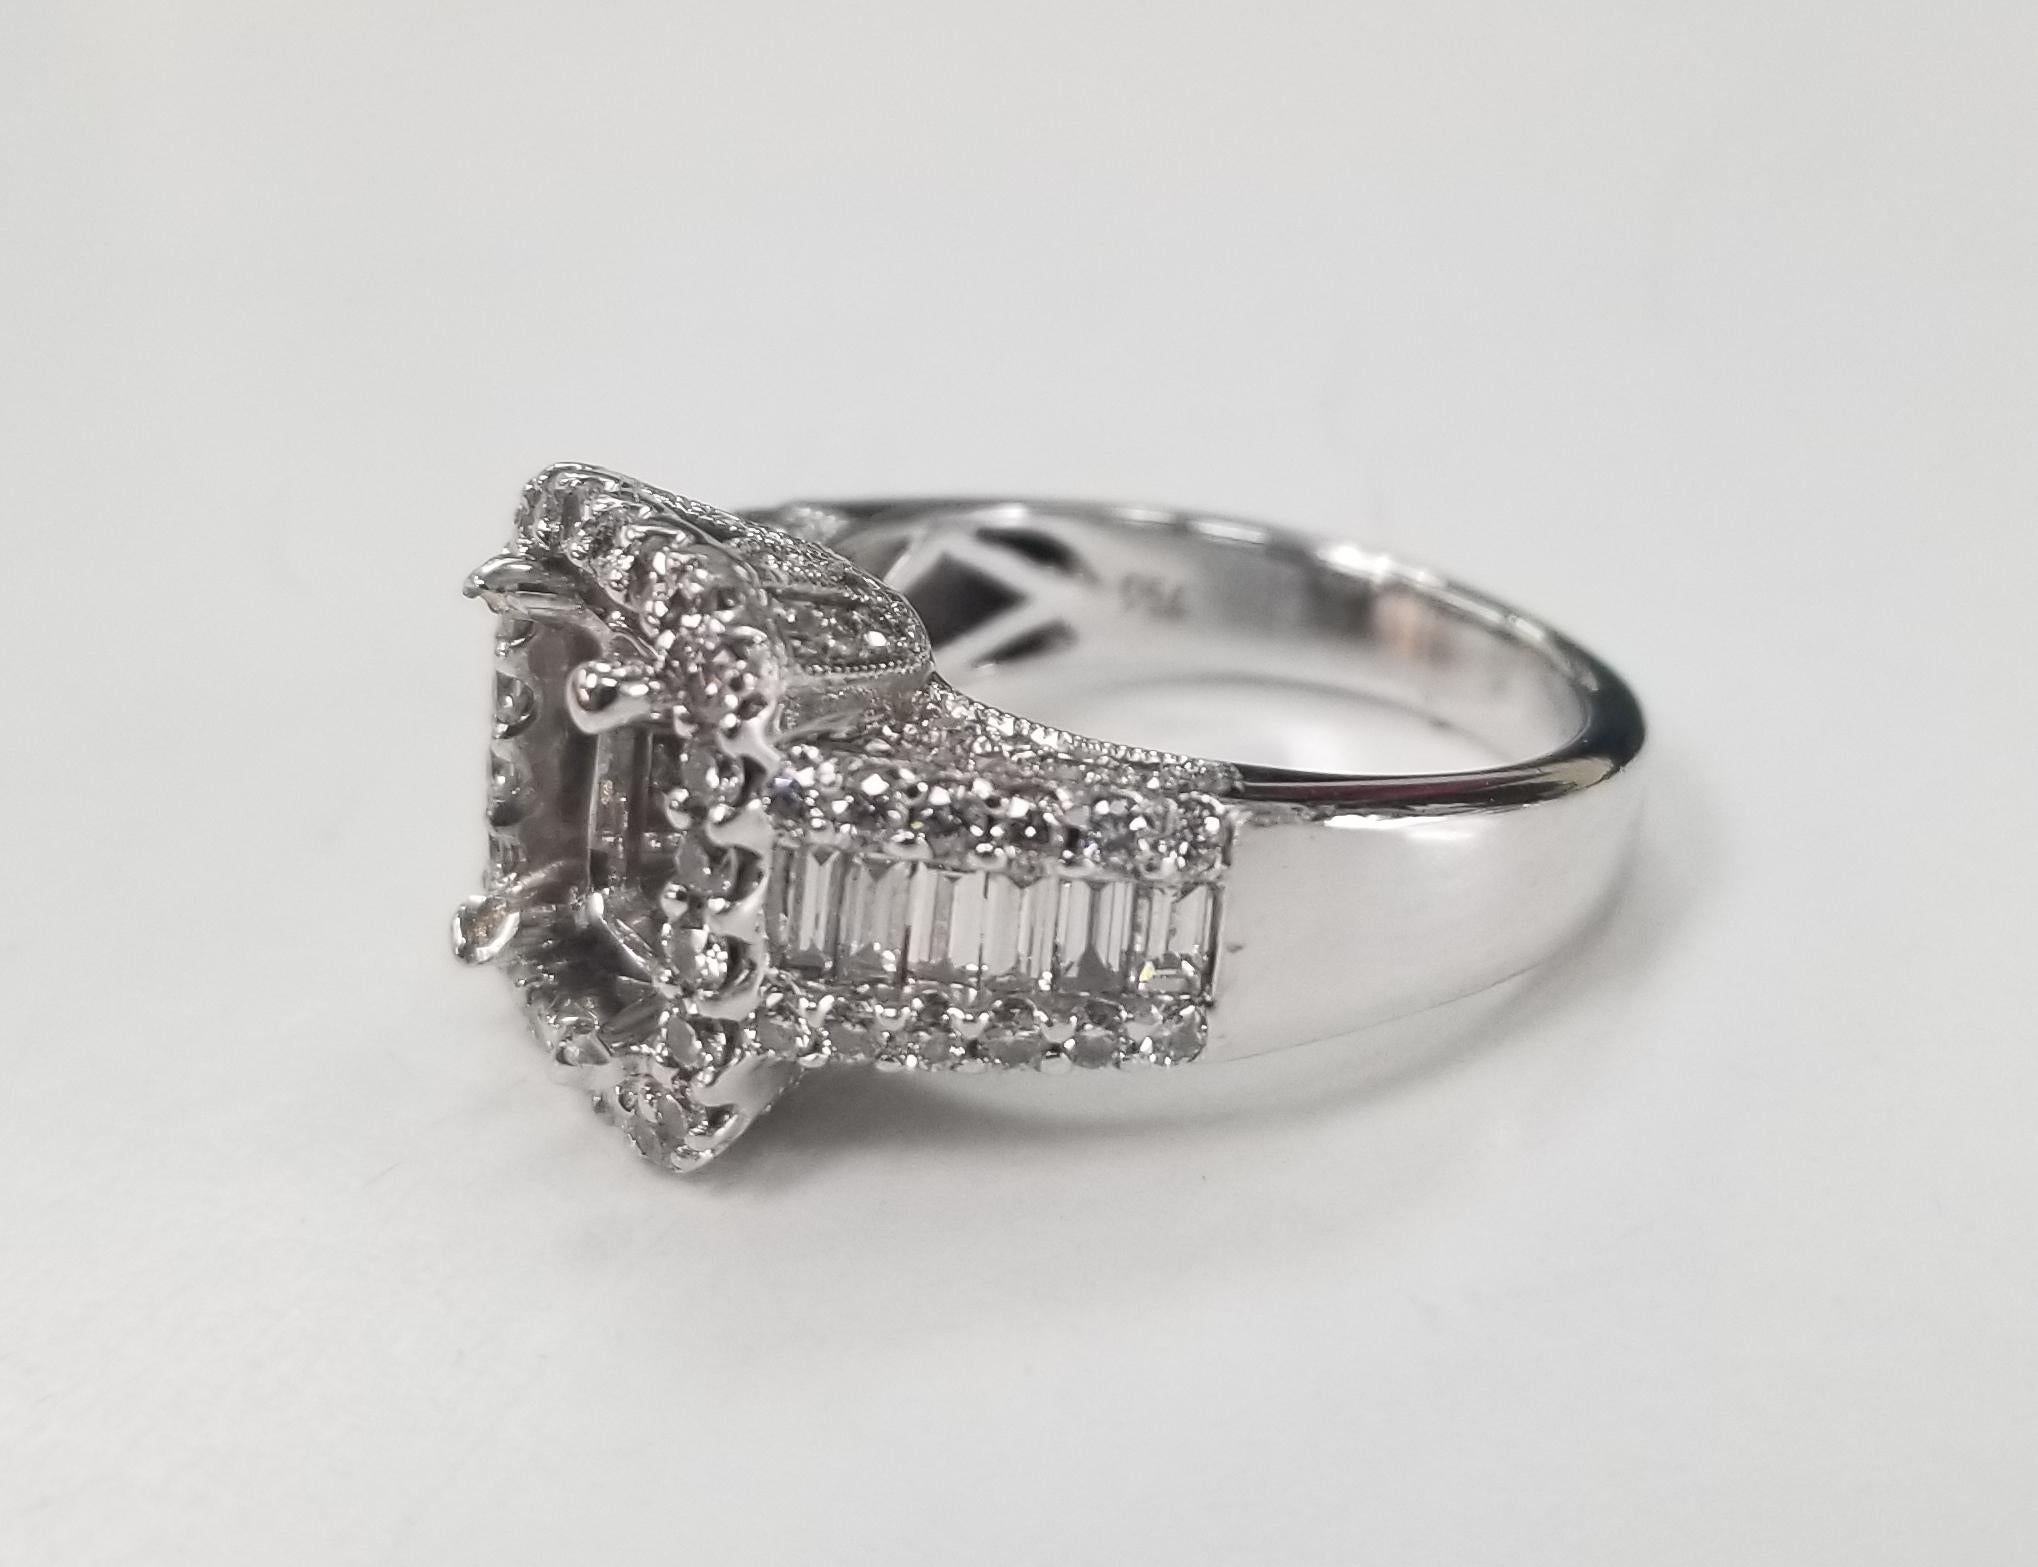 18k white gold baguette and round diamond halo ring, containing set with 12 baguette cut diamonds weighing .50pts. and 76 round full cut diamonds weighing .75pts. color 